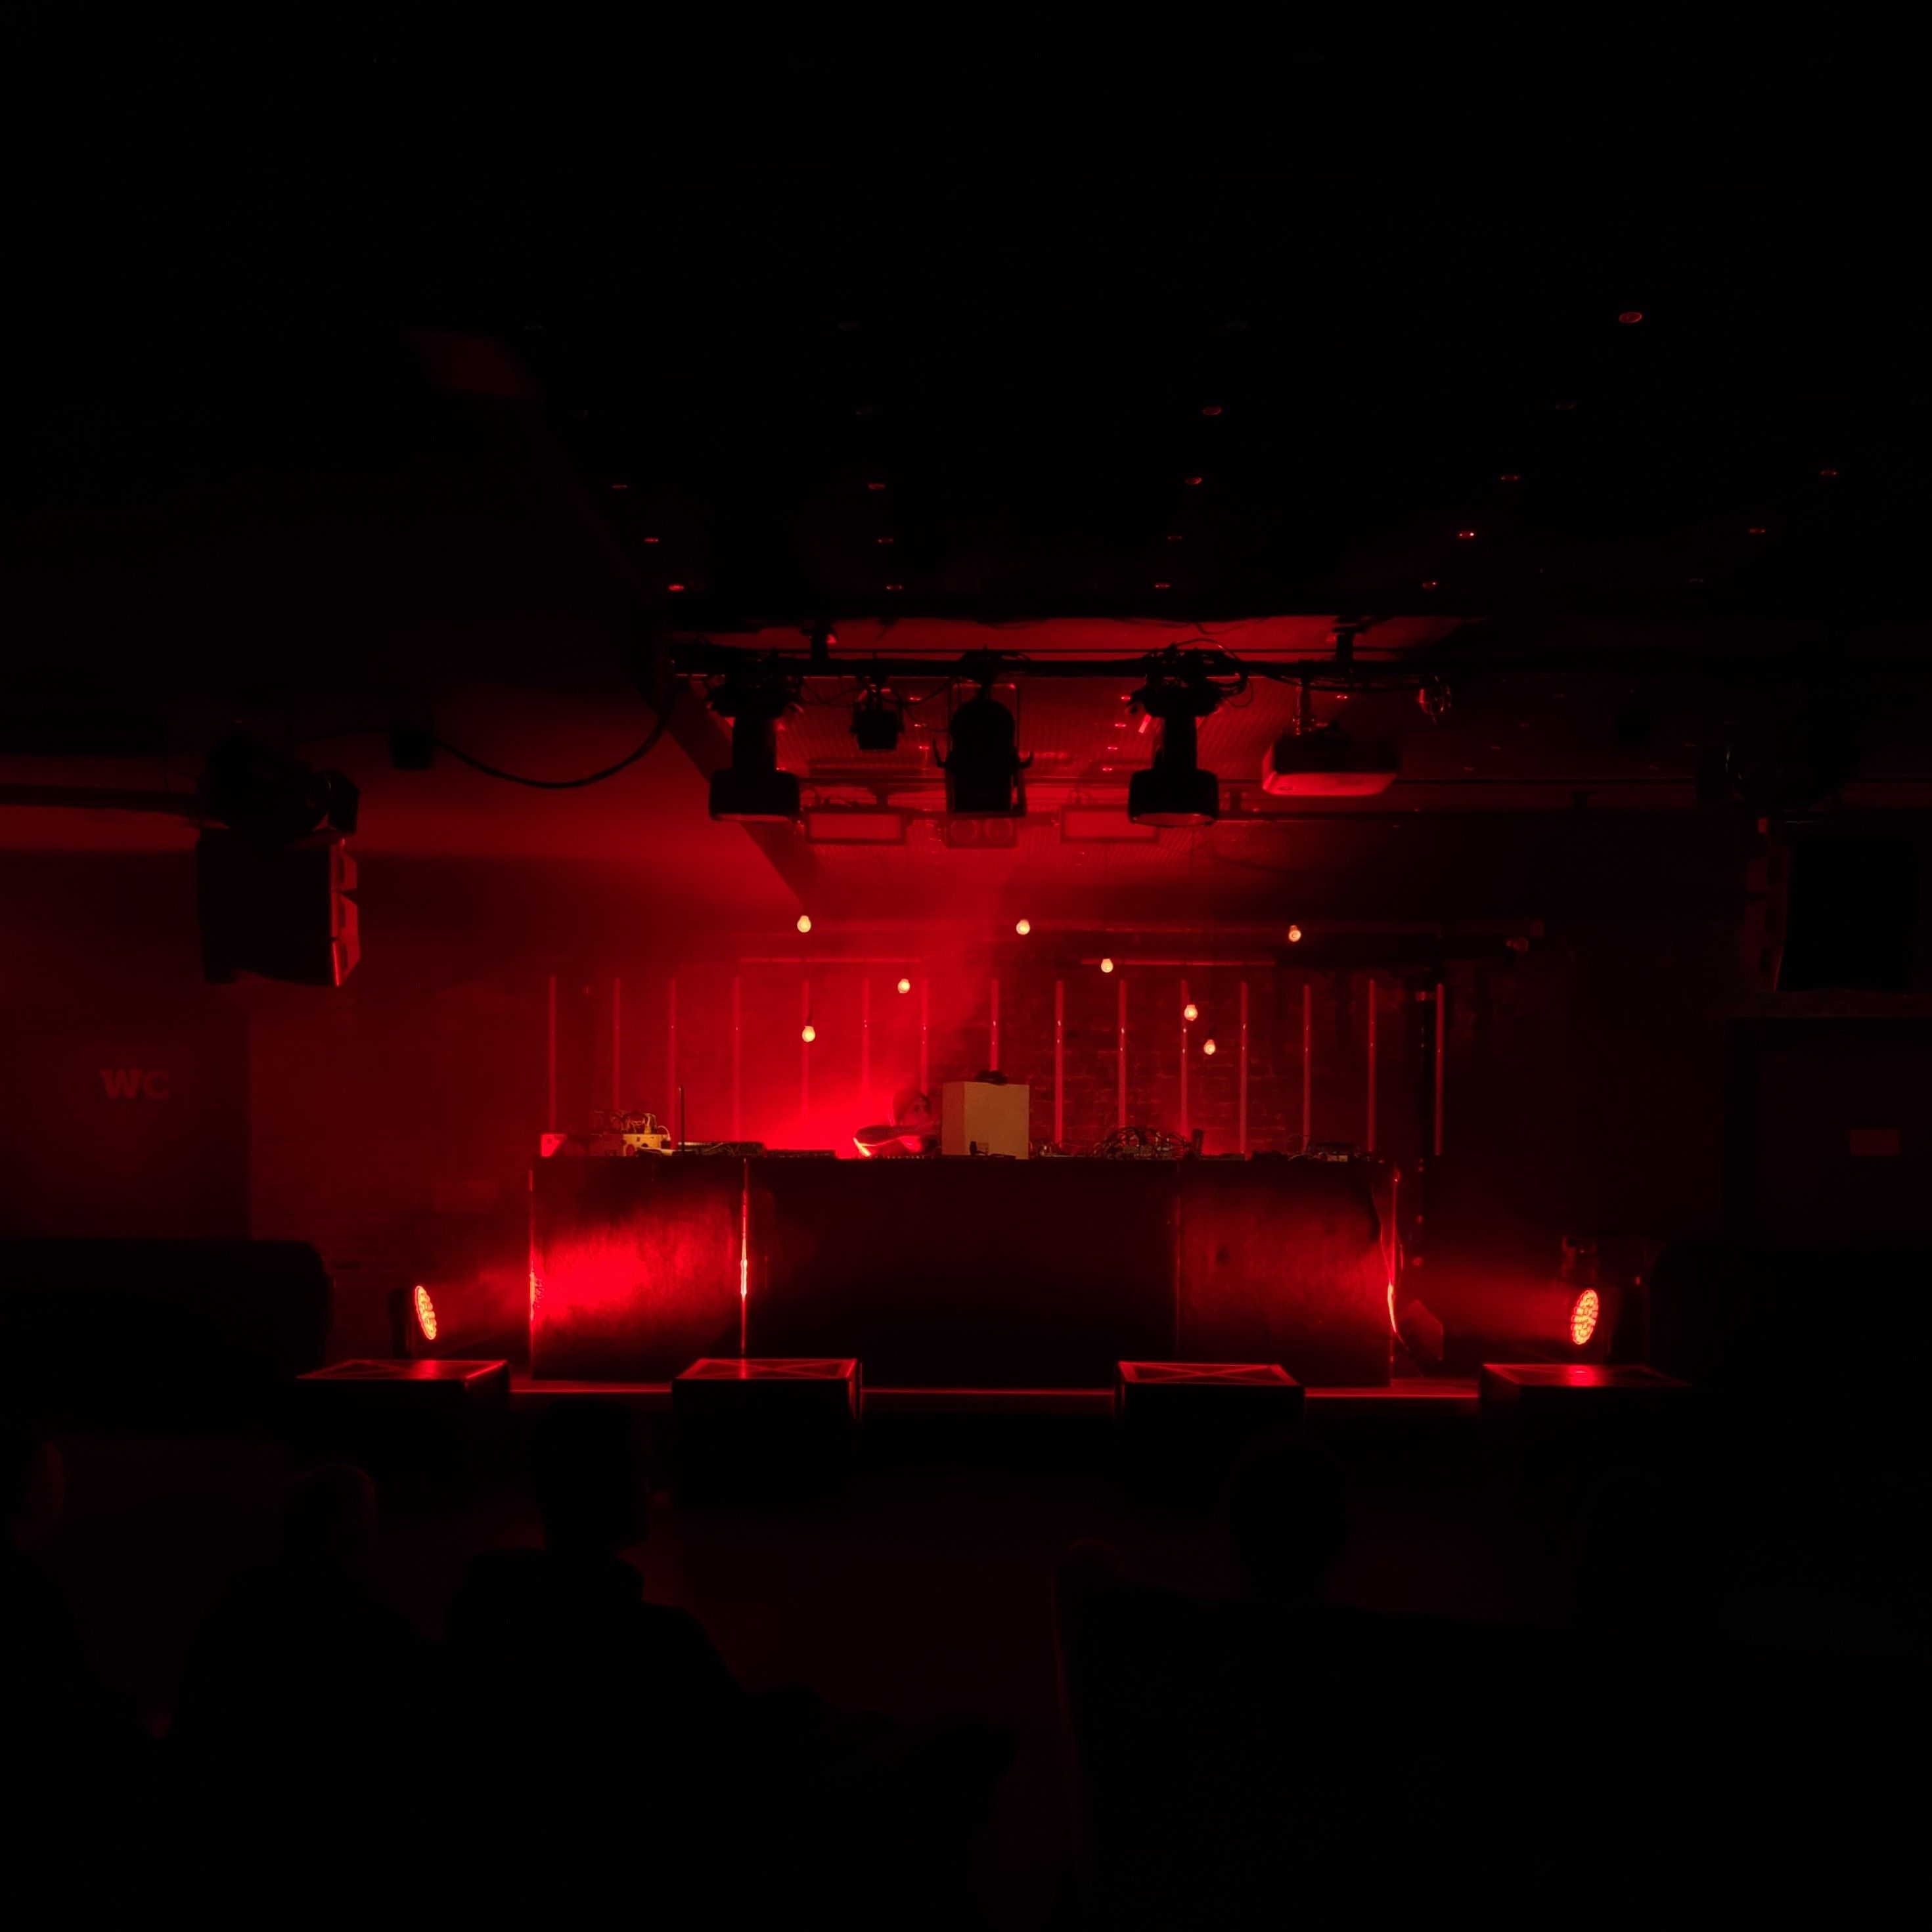 There is a stage and a DJ booth on the stage. The room is bathed in a red light.